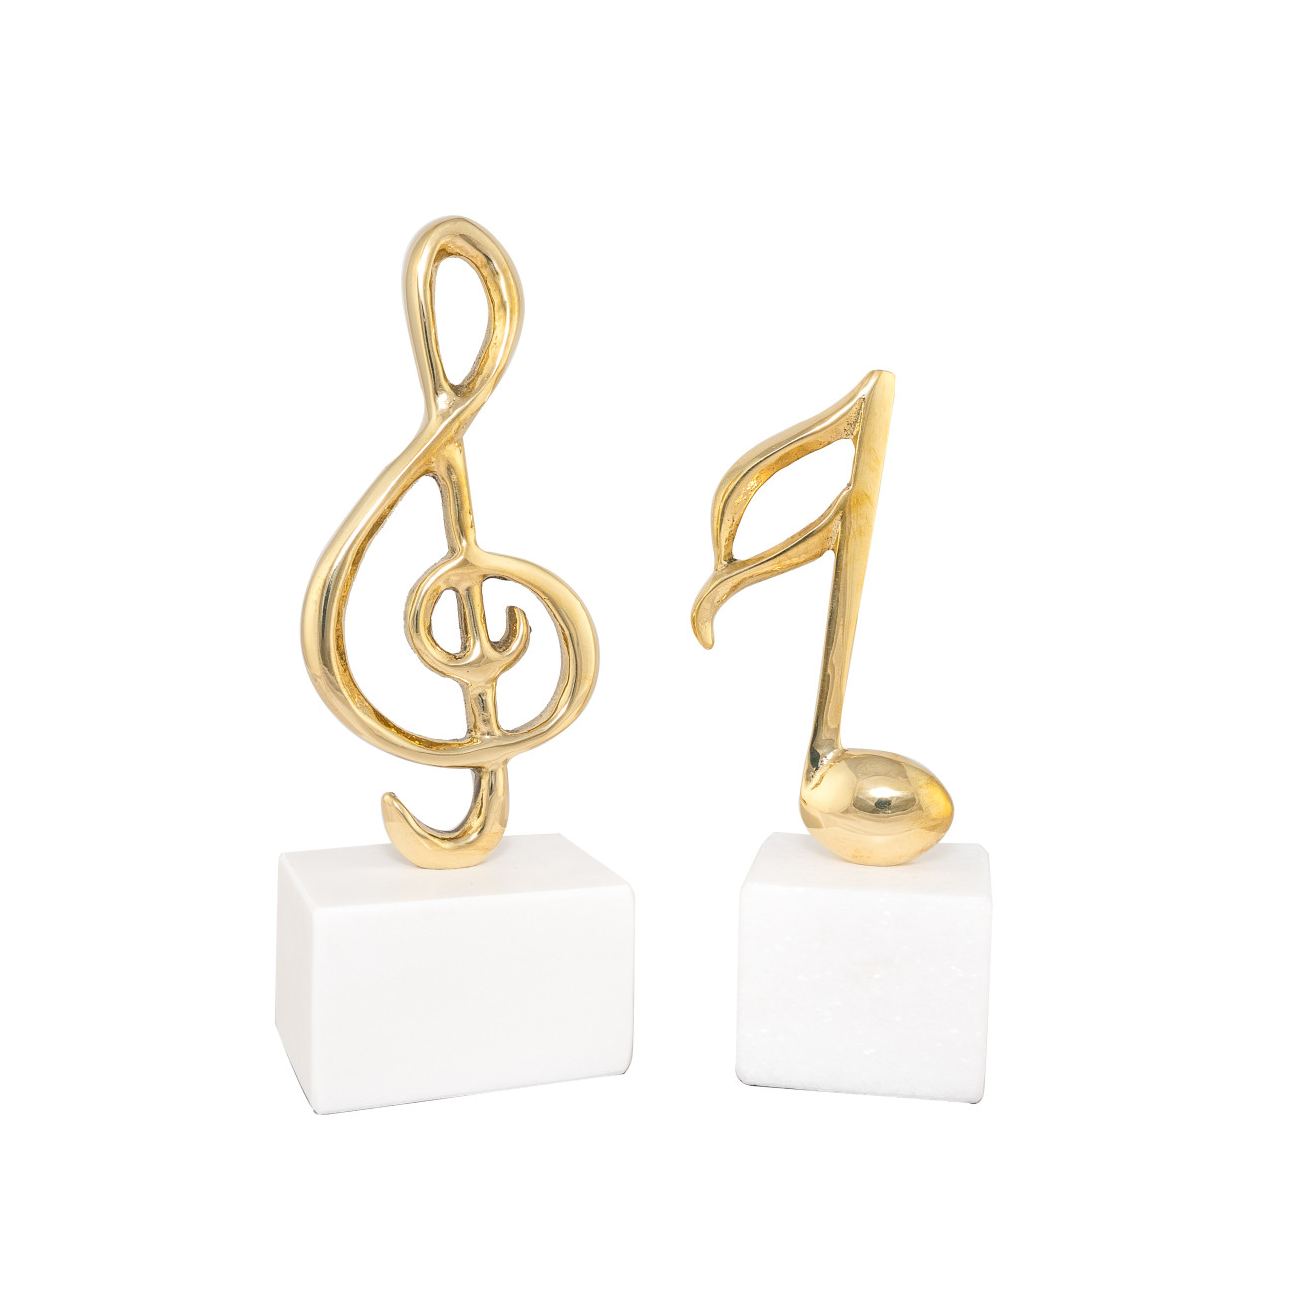 Music Note Decor Musical Sculpture Statue Music Note Figuring Stave Musical Symbol Decoration Desktop Resin Craft Atyhao Music Note Figurine 